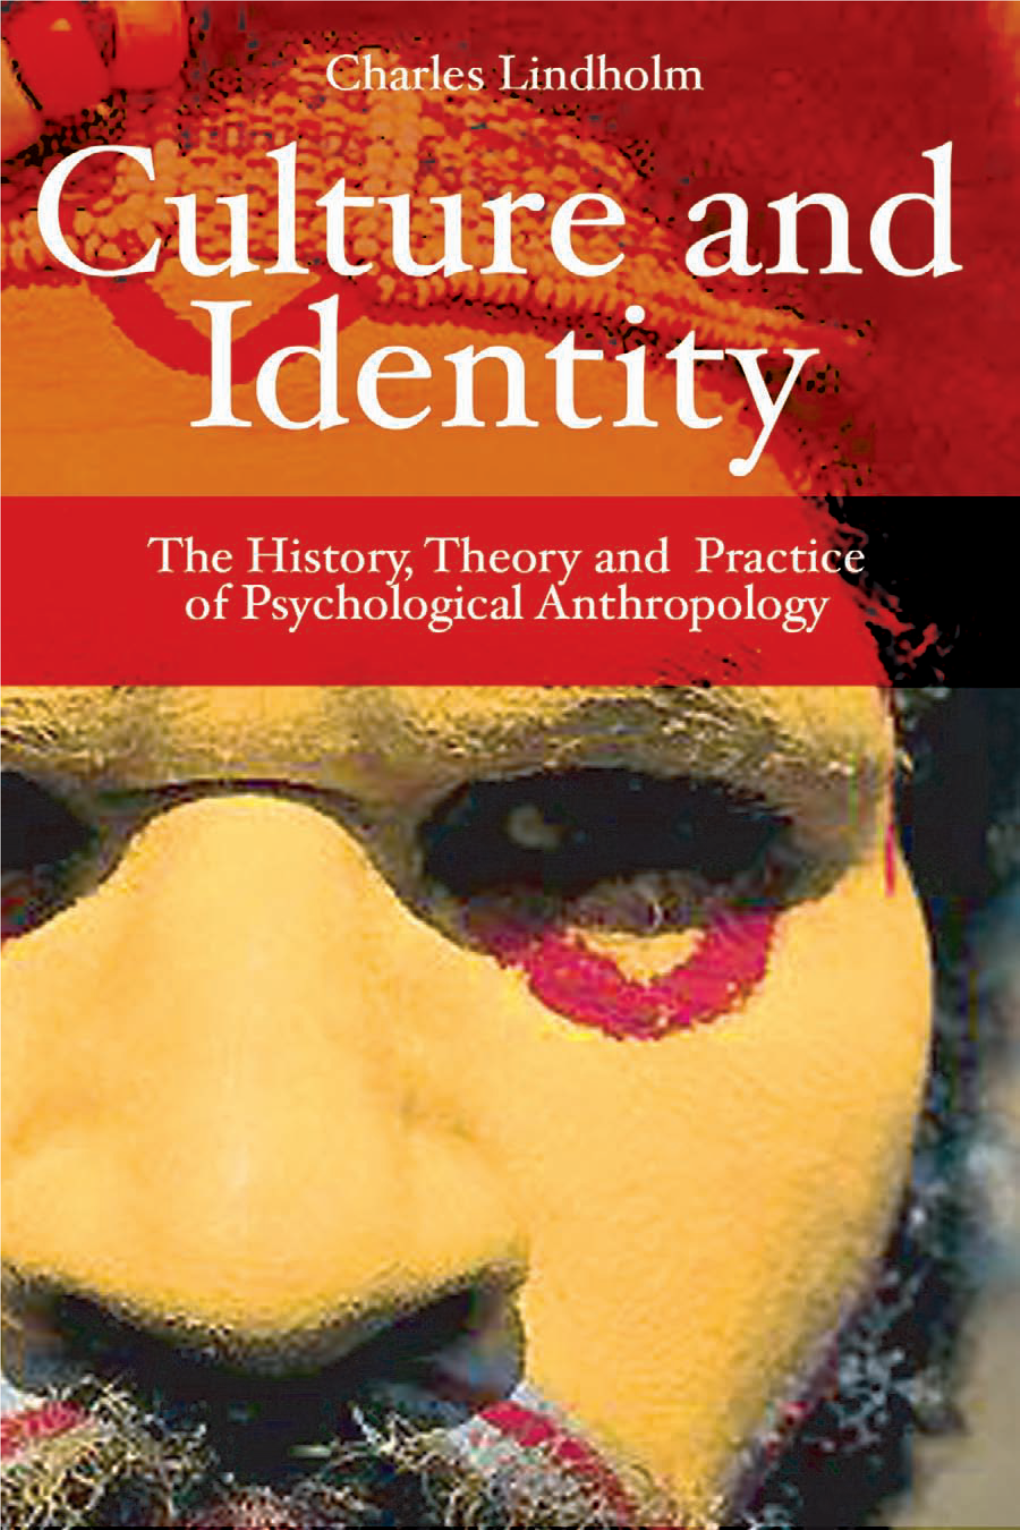 The History, Theory, and Practice of Psychological Anthropology